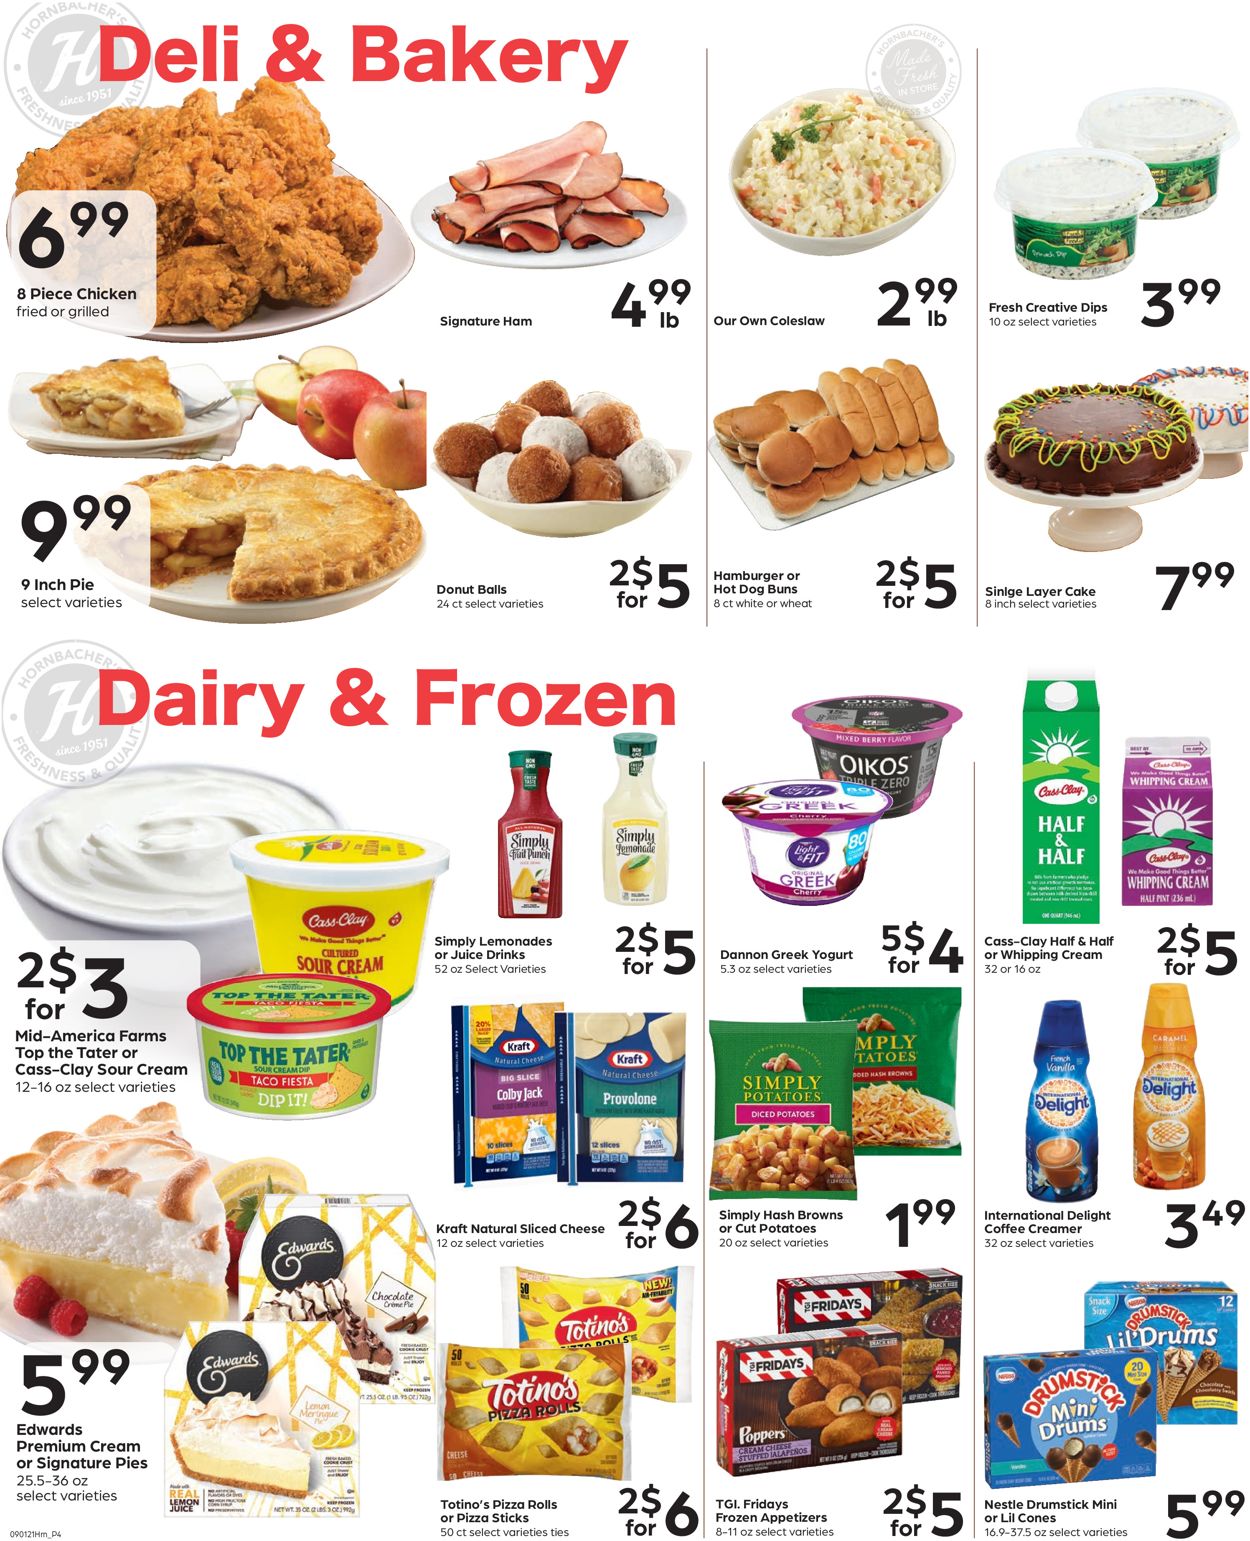 Hornbacher's Weekly Ad Circular - valid 09/01-09/07/2021 (Page 4)